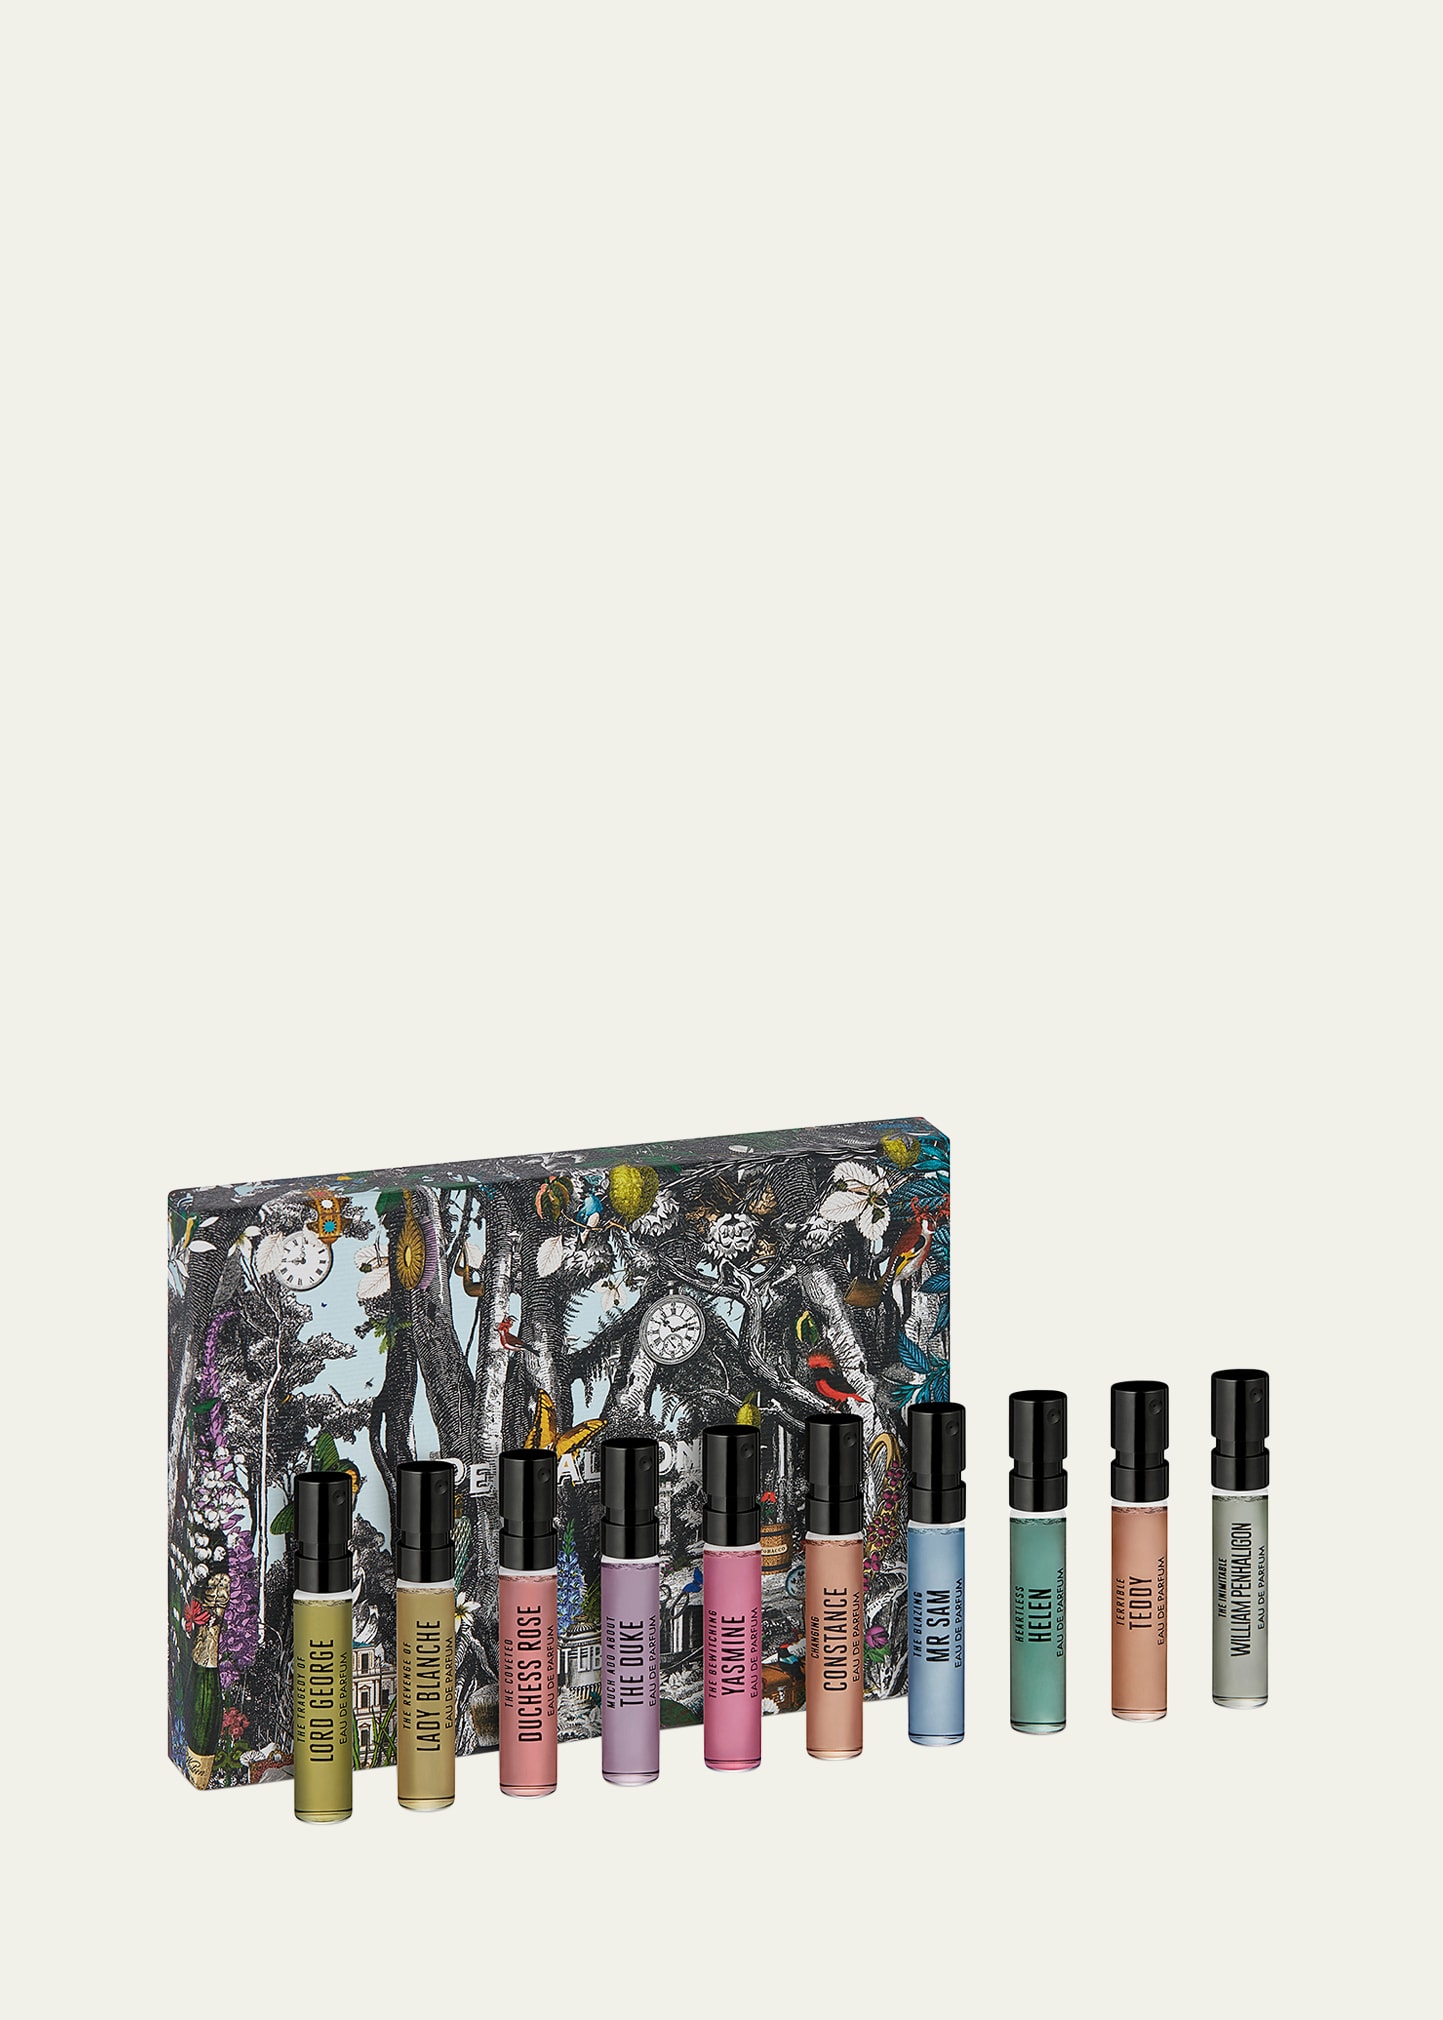 Portraits Scent Library, 10 x 2 mL